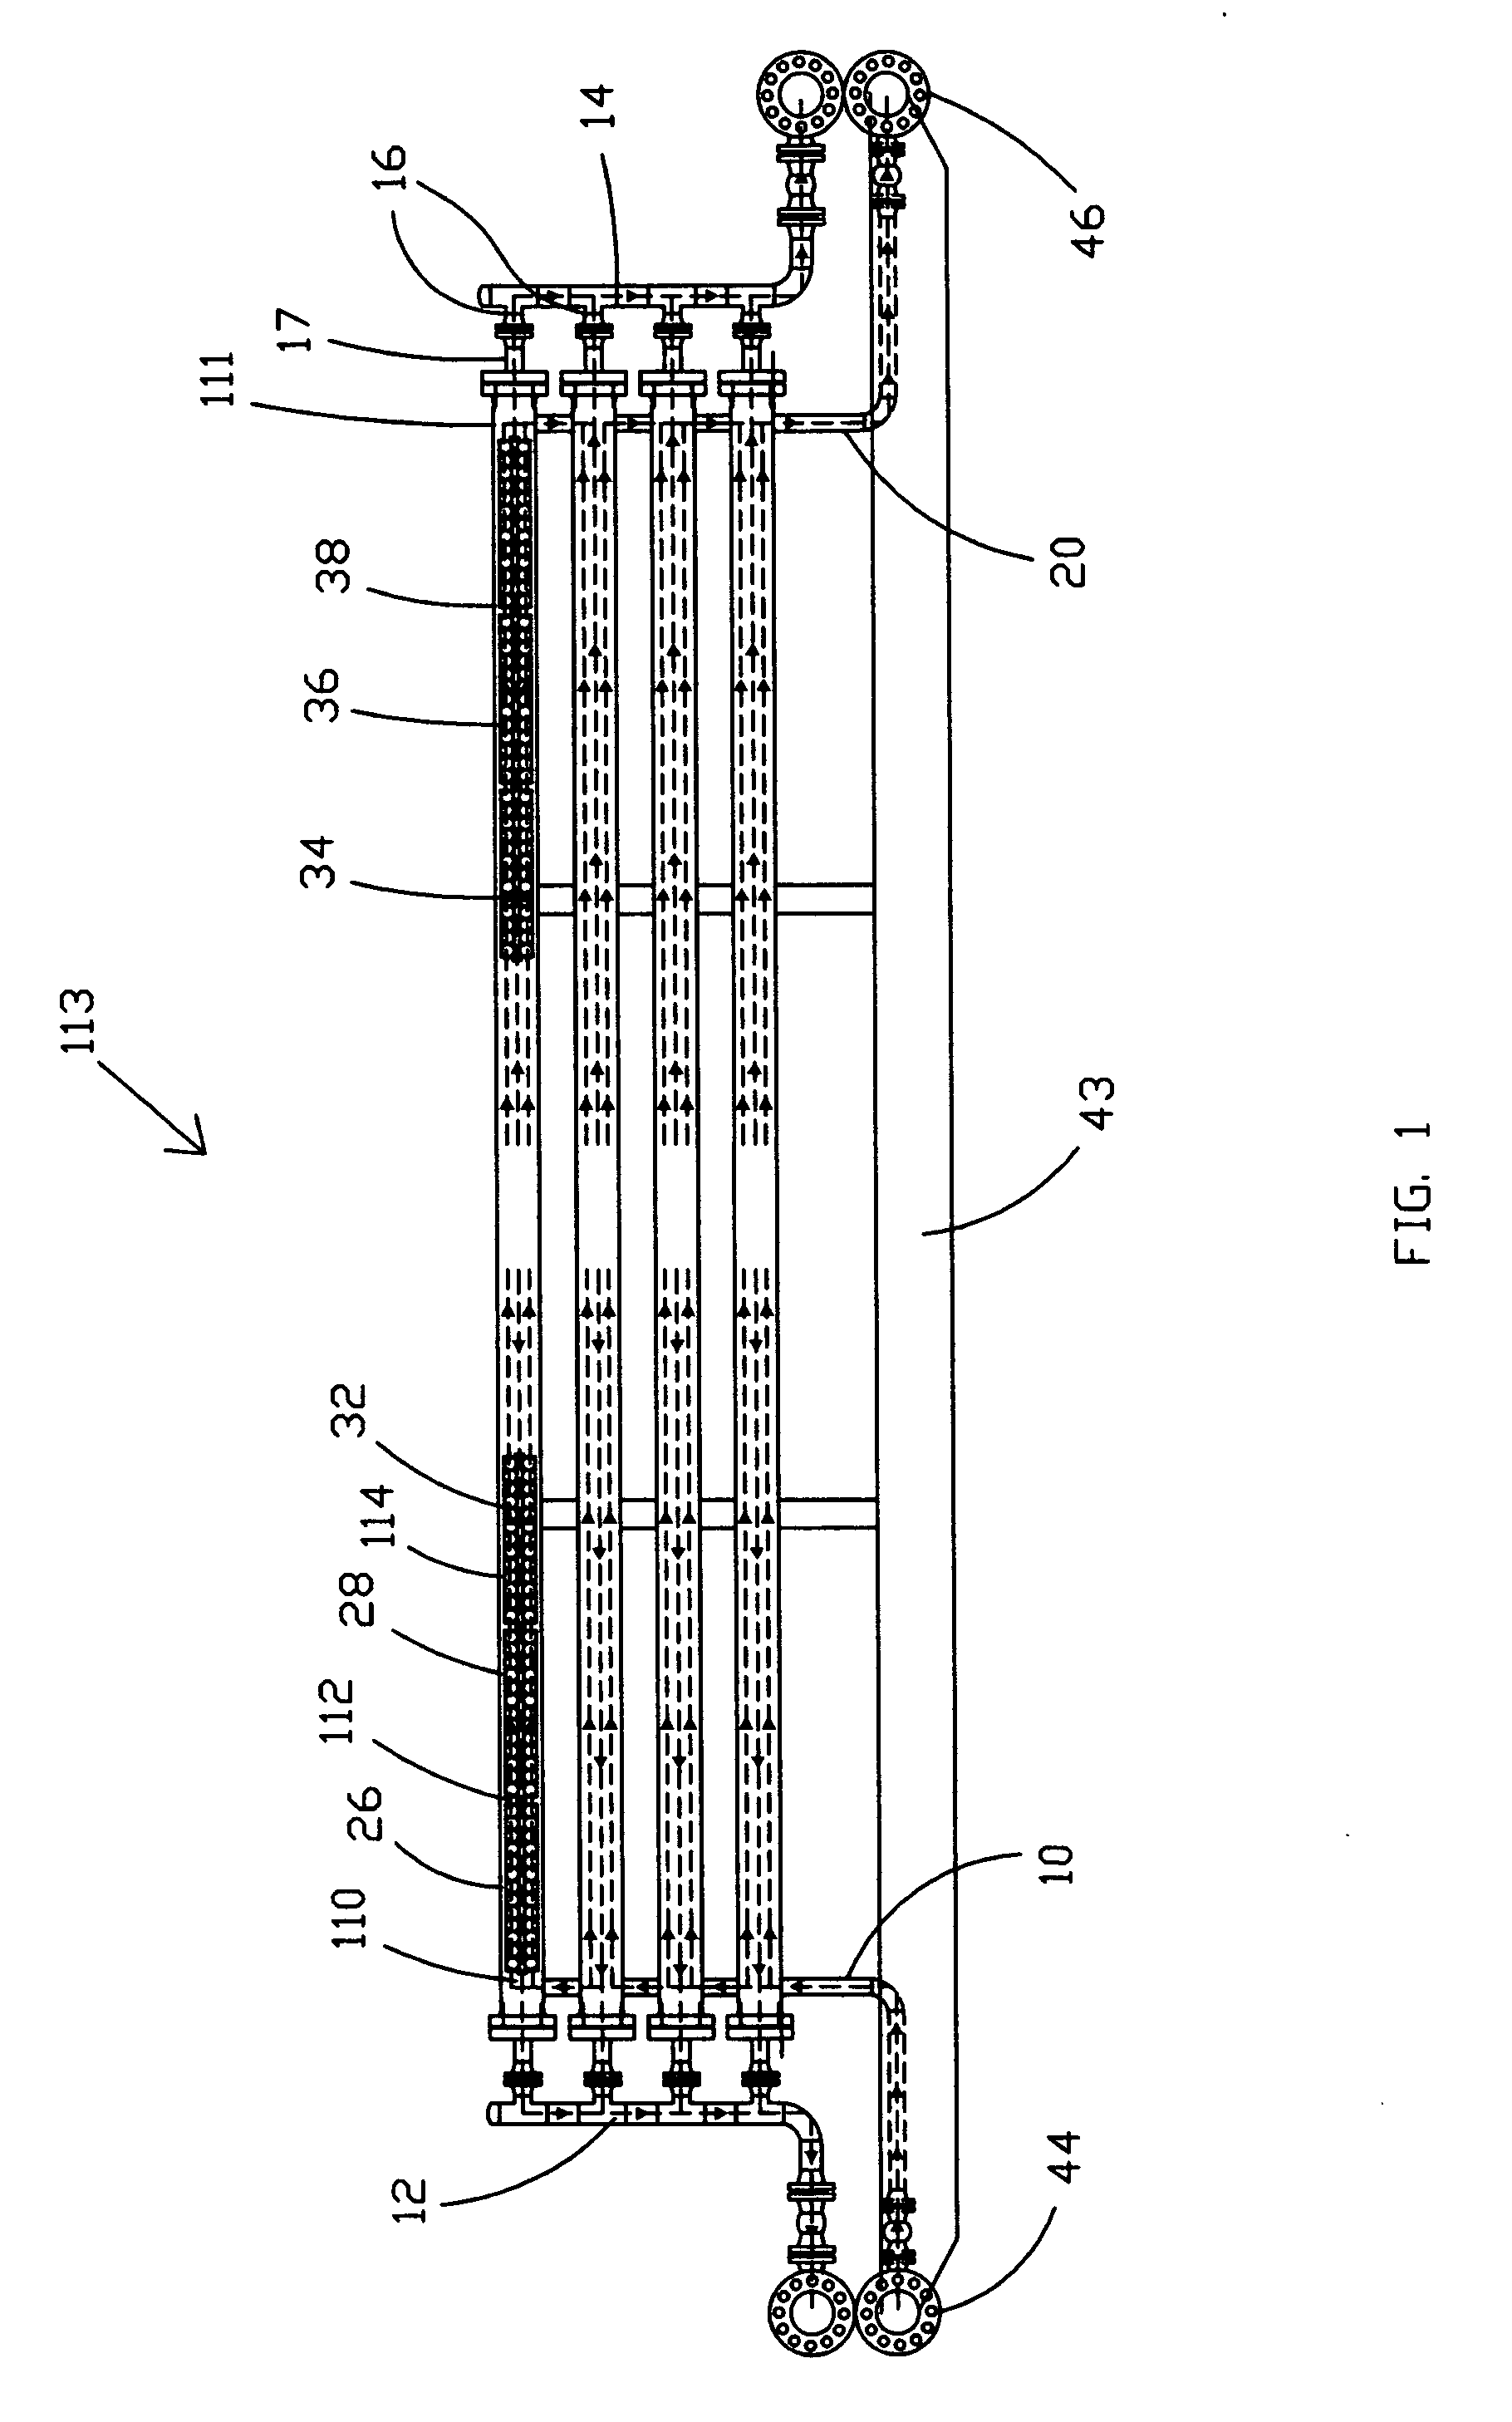 Compact membrane unit and methods